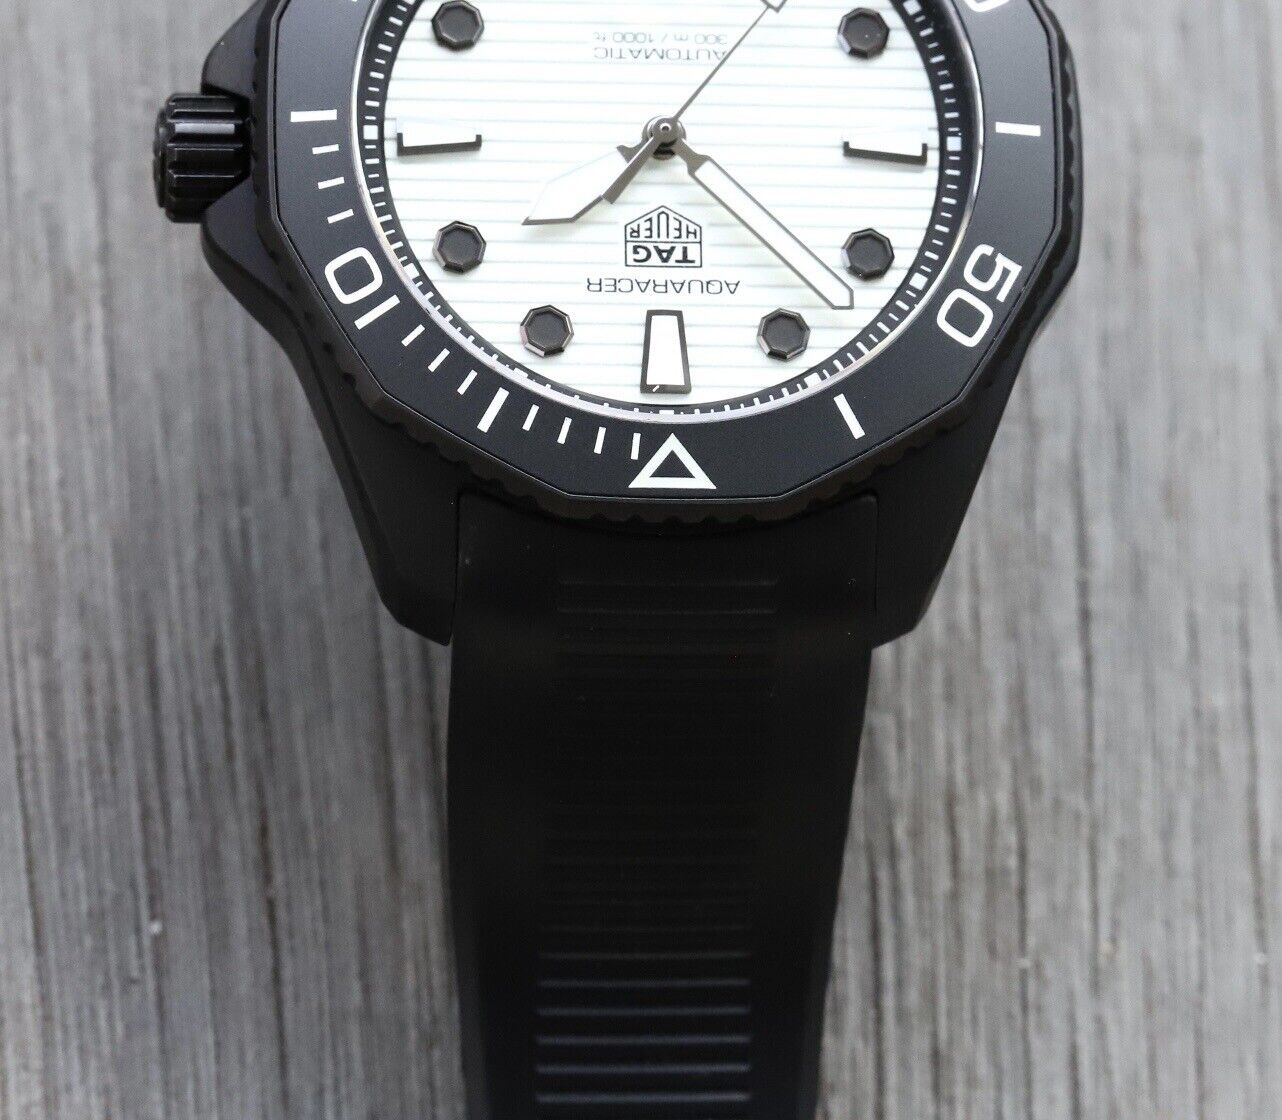 TAG Heuer Aquaracer 300M Chronograph for $1,642 for sale from a Private  Seller on Chrono24